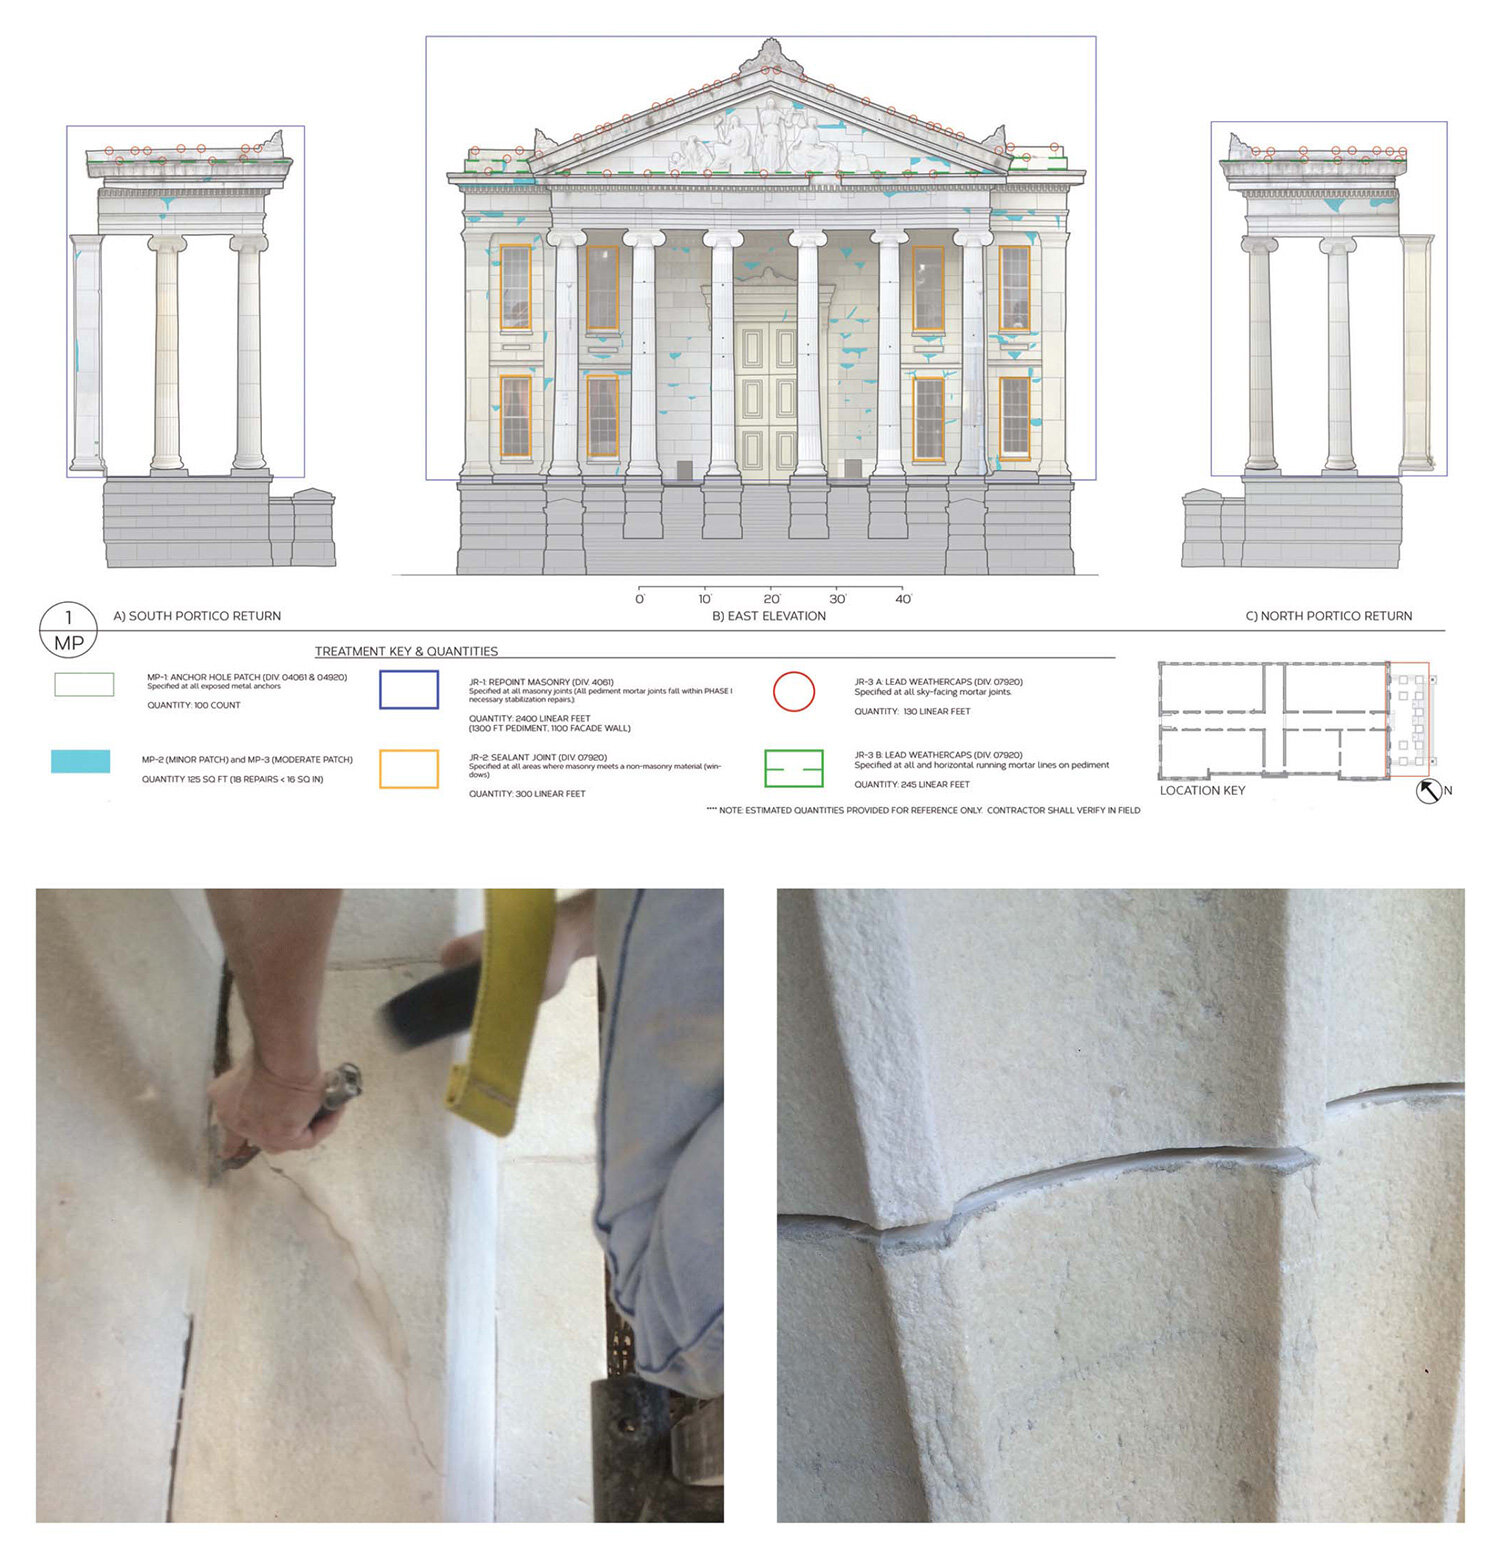   Joint Repairs   As the loss of mortar joint material was the underlying cause of the stone failure, the project undertook the complete repointing of all stone joints and the addition of discrete metal weathercaps to improve the sealing of mortar jo